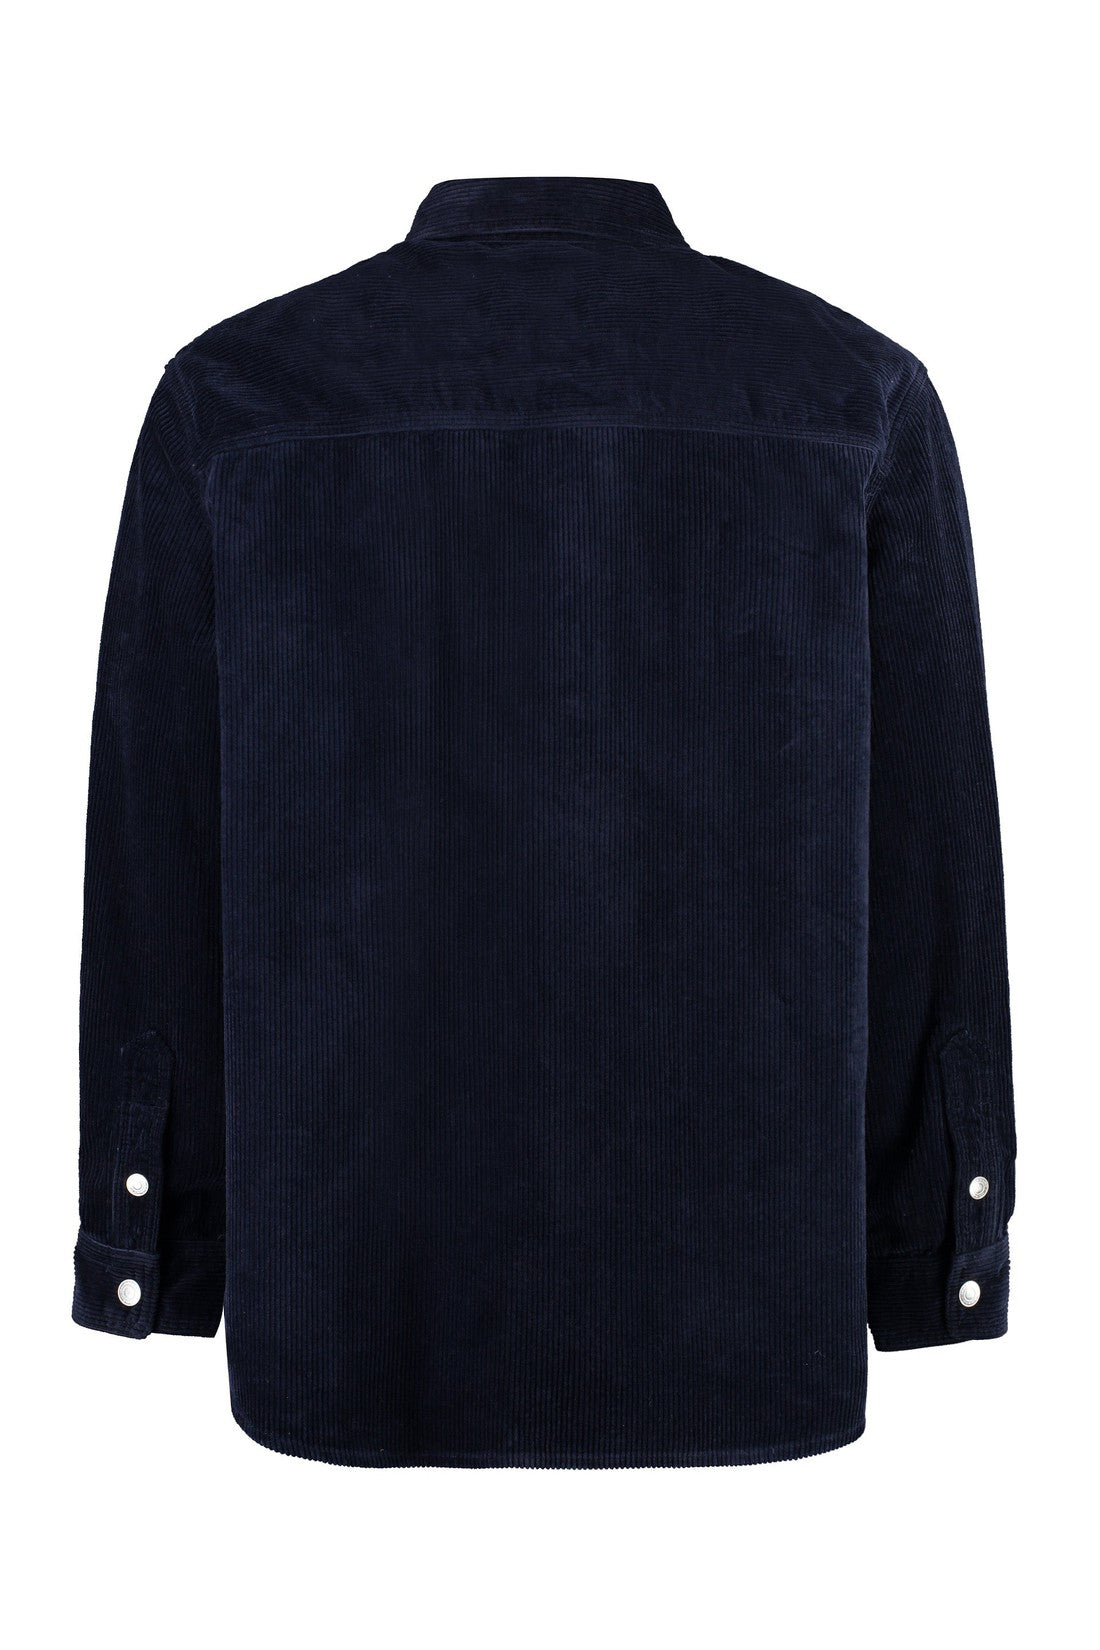 Isabel Marant-OUTLET-SALE-Ritchie wool overshirt-ARCHIVIST